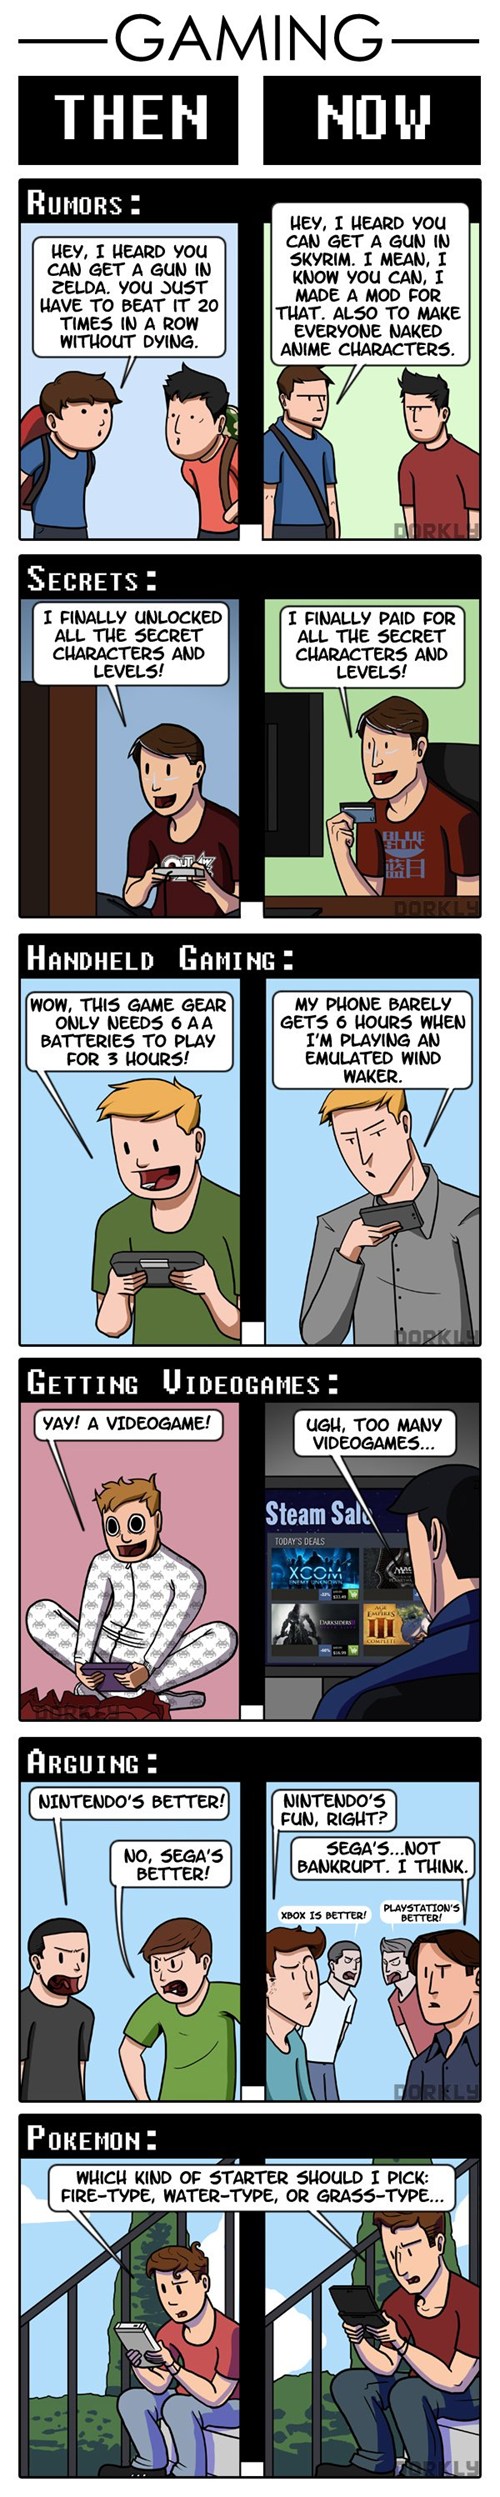 video games now and then